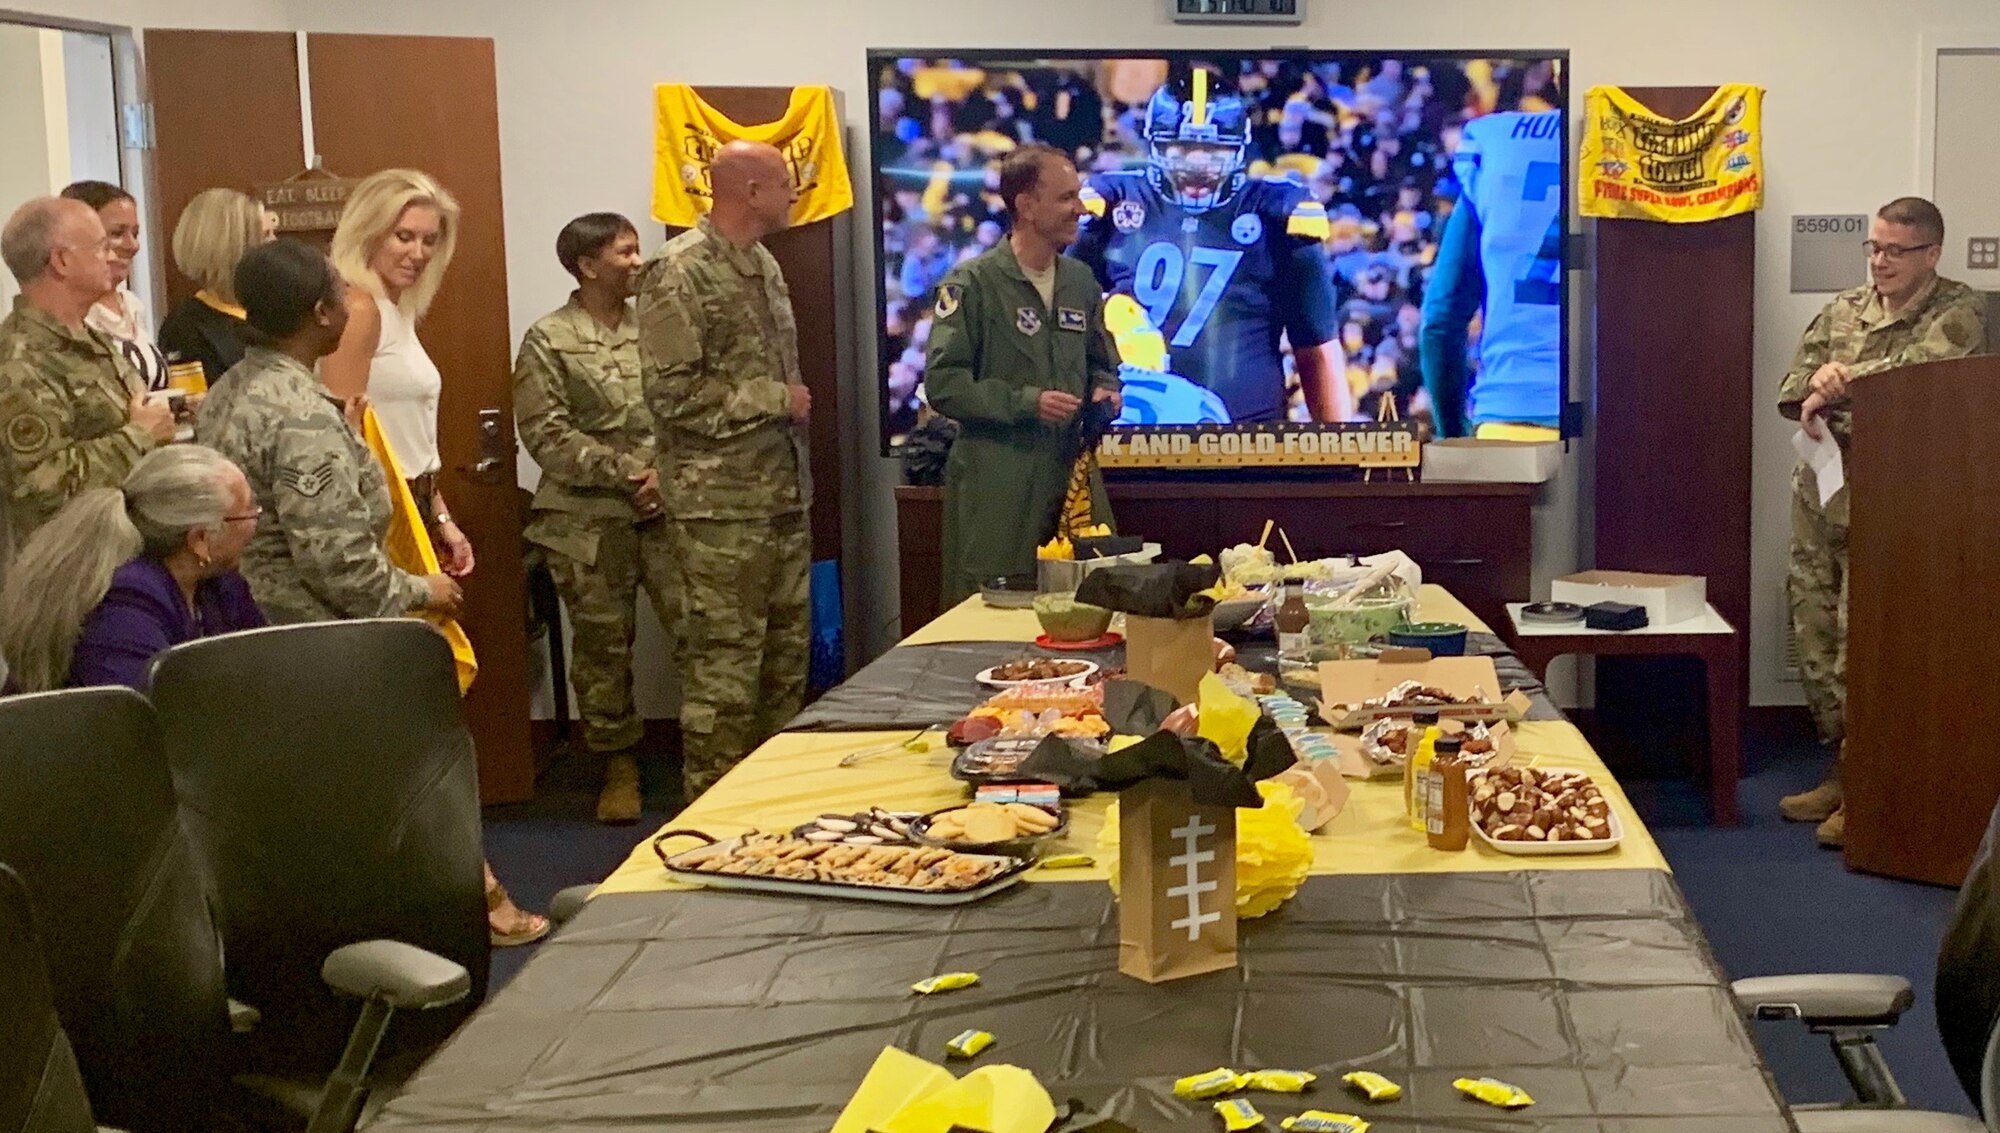 Staffers and family members gathered Sept. 5 for a Pittsburgh Steelers-themed send off at Air Force District of Washington headquarters in honor of outgoing Vice Commander Col. Kevin Eastland.